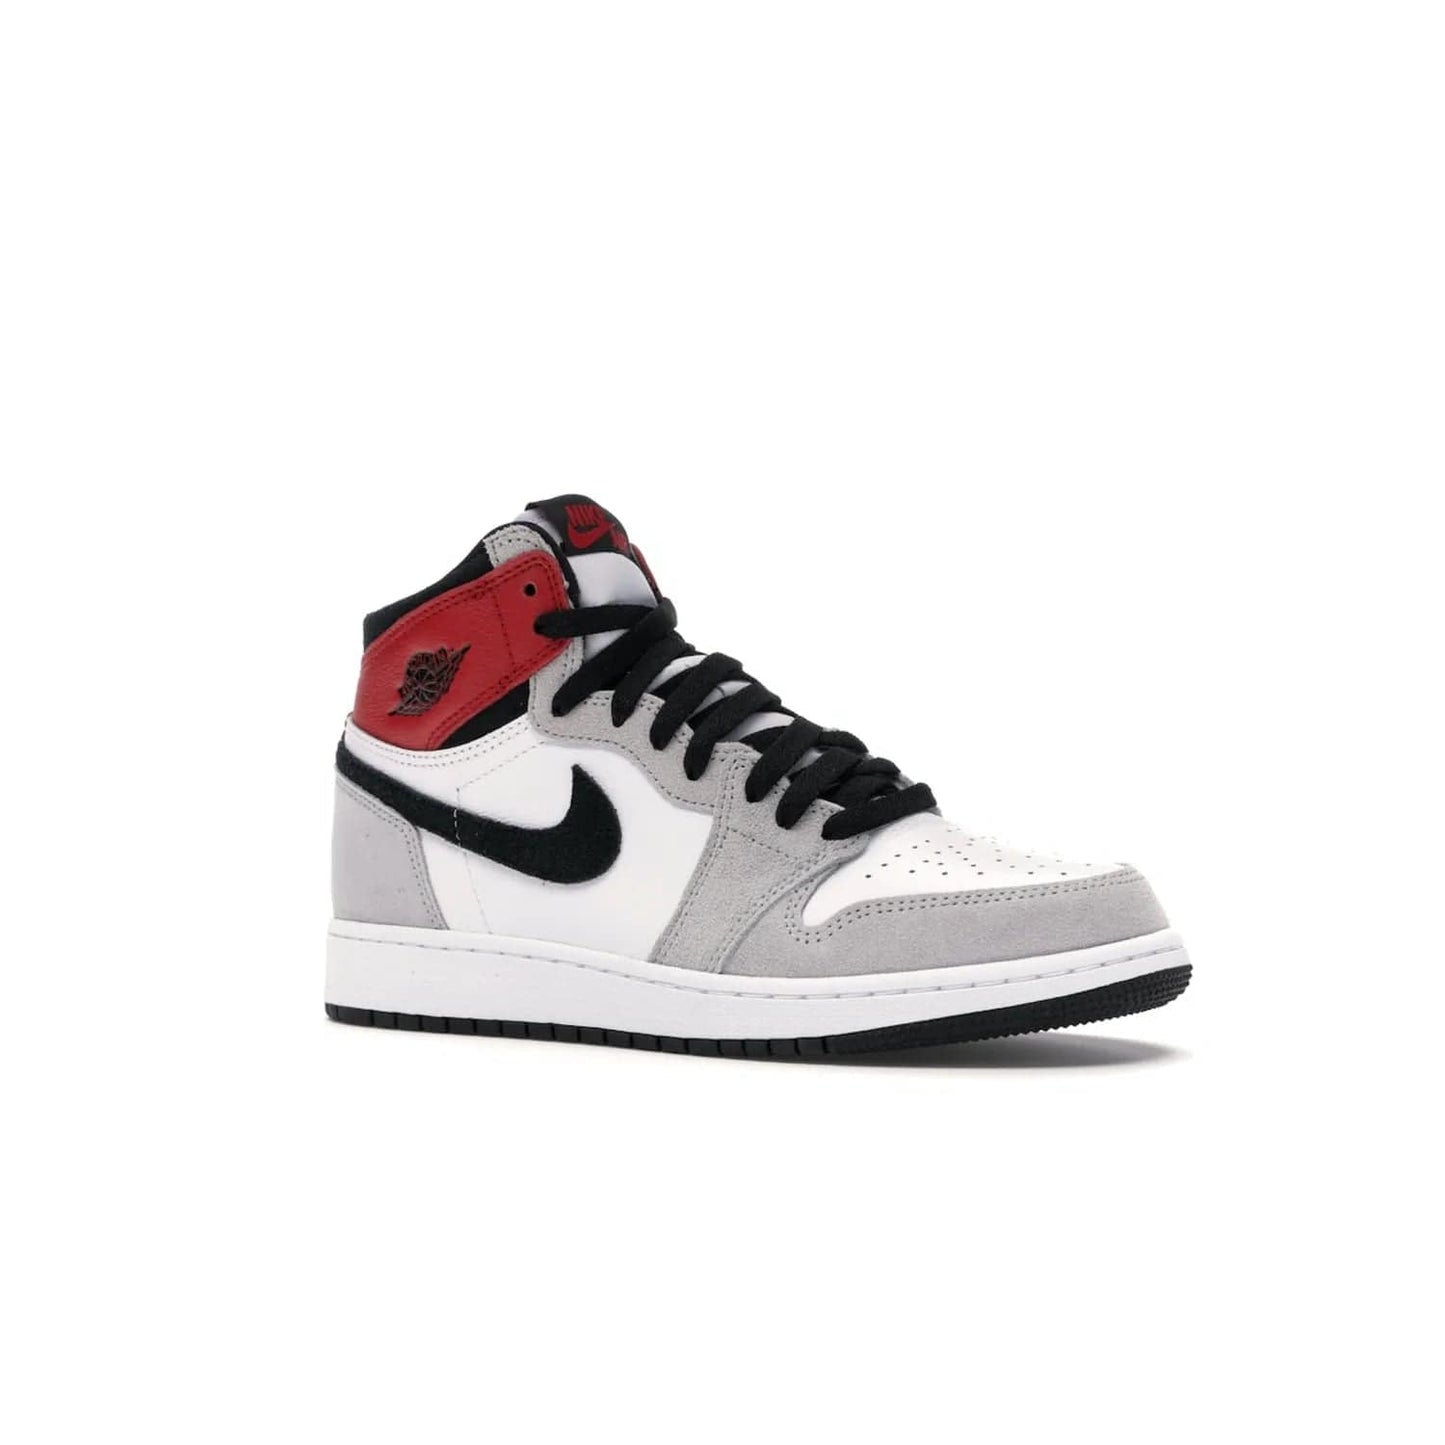 Jordan 1 Retro High Light Smoke Grey (GS) - Image 4 - Only at www.BallersClubKickz.com - Jordan 1 Retro High Light Smoke Grey (GS) features shades of grey, black, and Varsity Red with a bold silhouette. Premium white leather and suede overlays create a unique look. Released July 2020, offering style and performance. Perfect sneaker for any collector or fan.